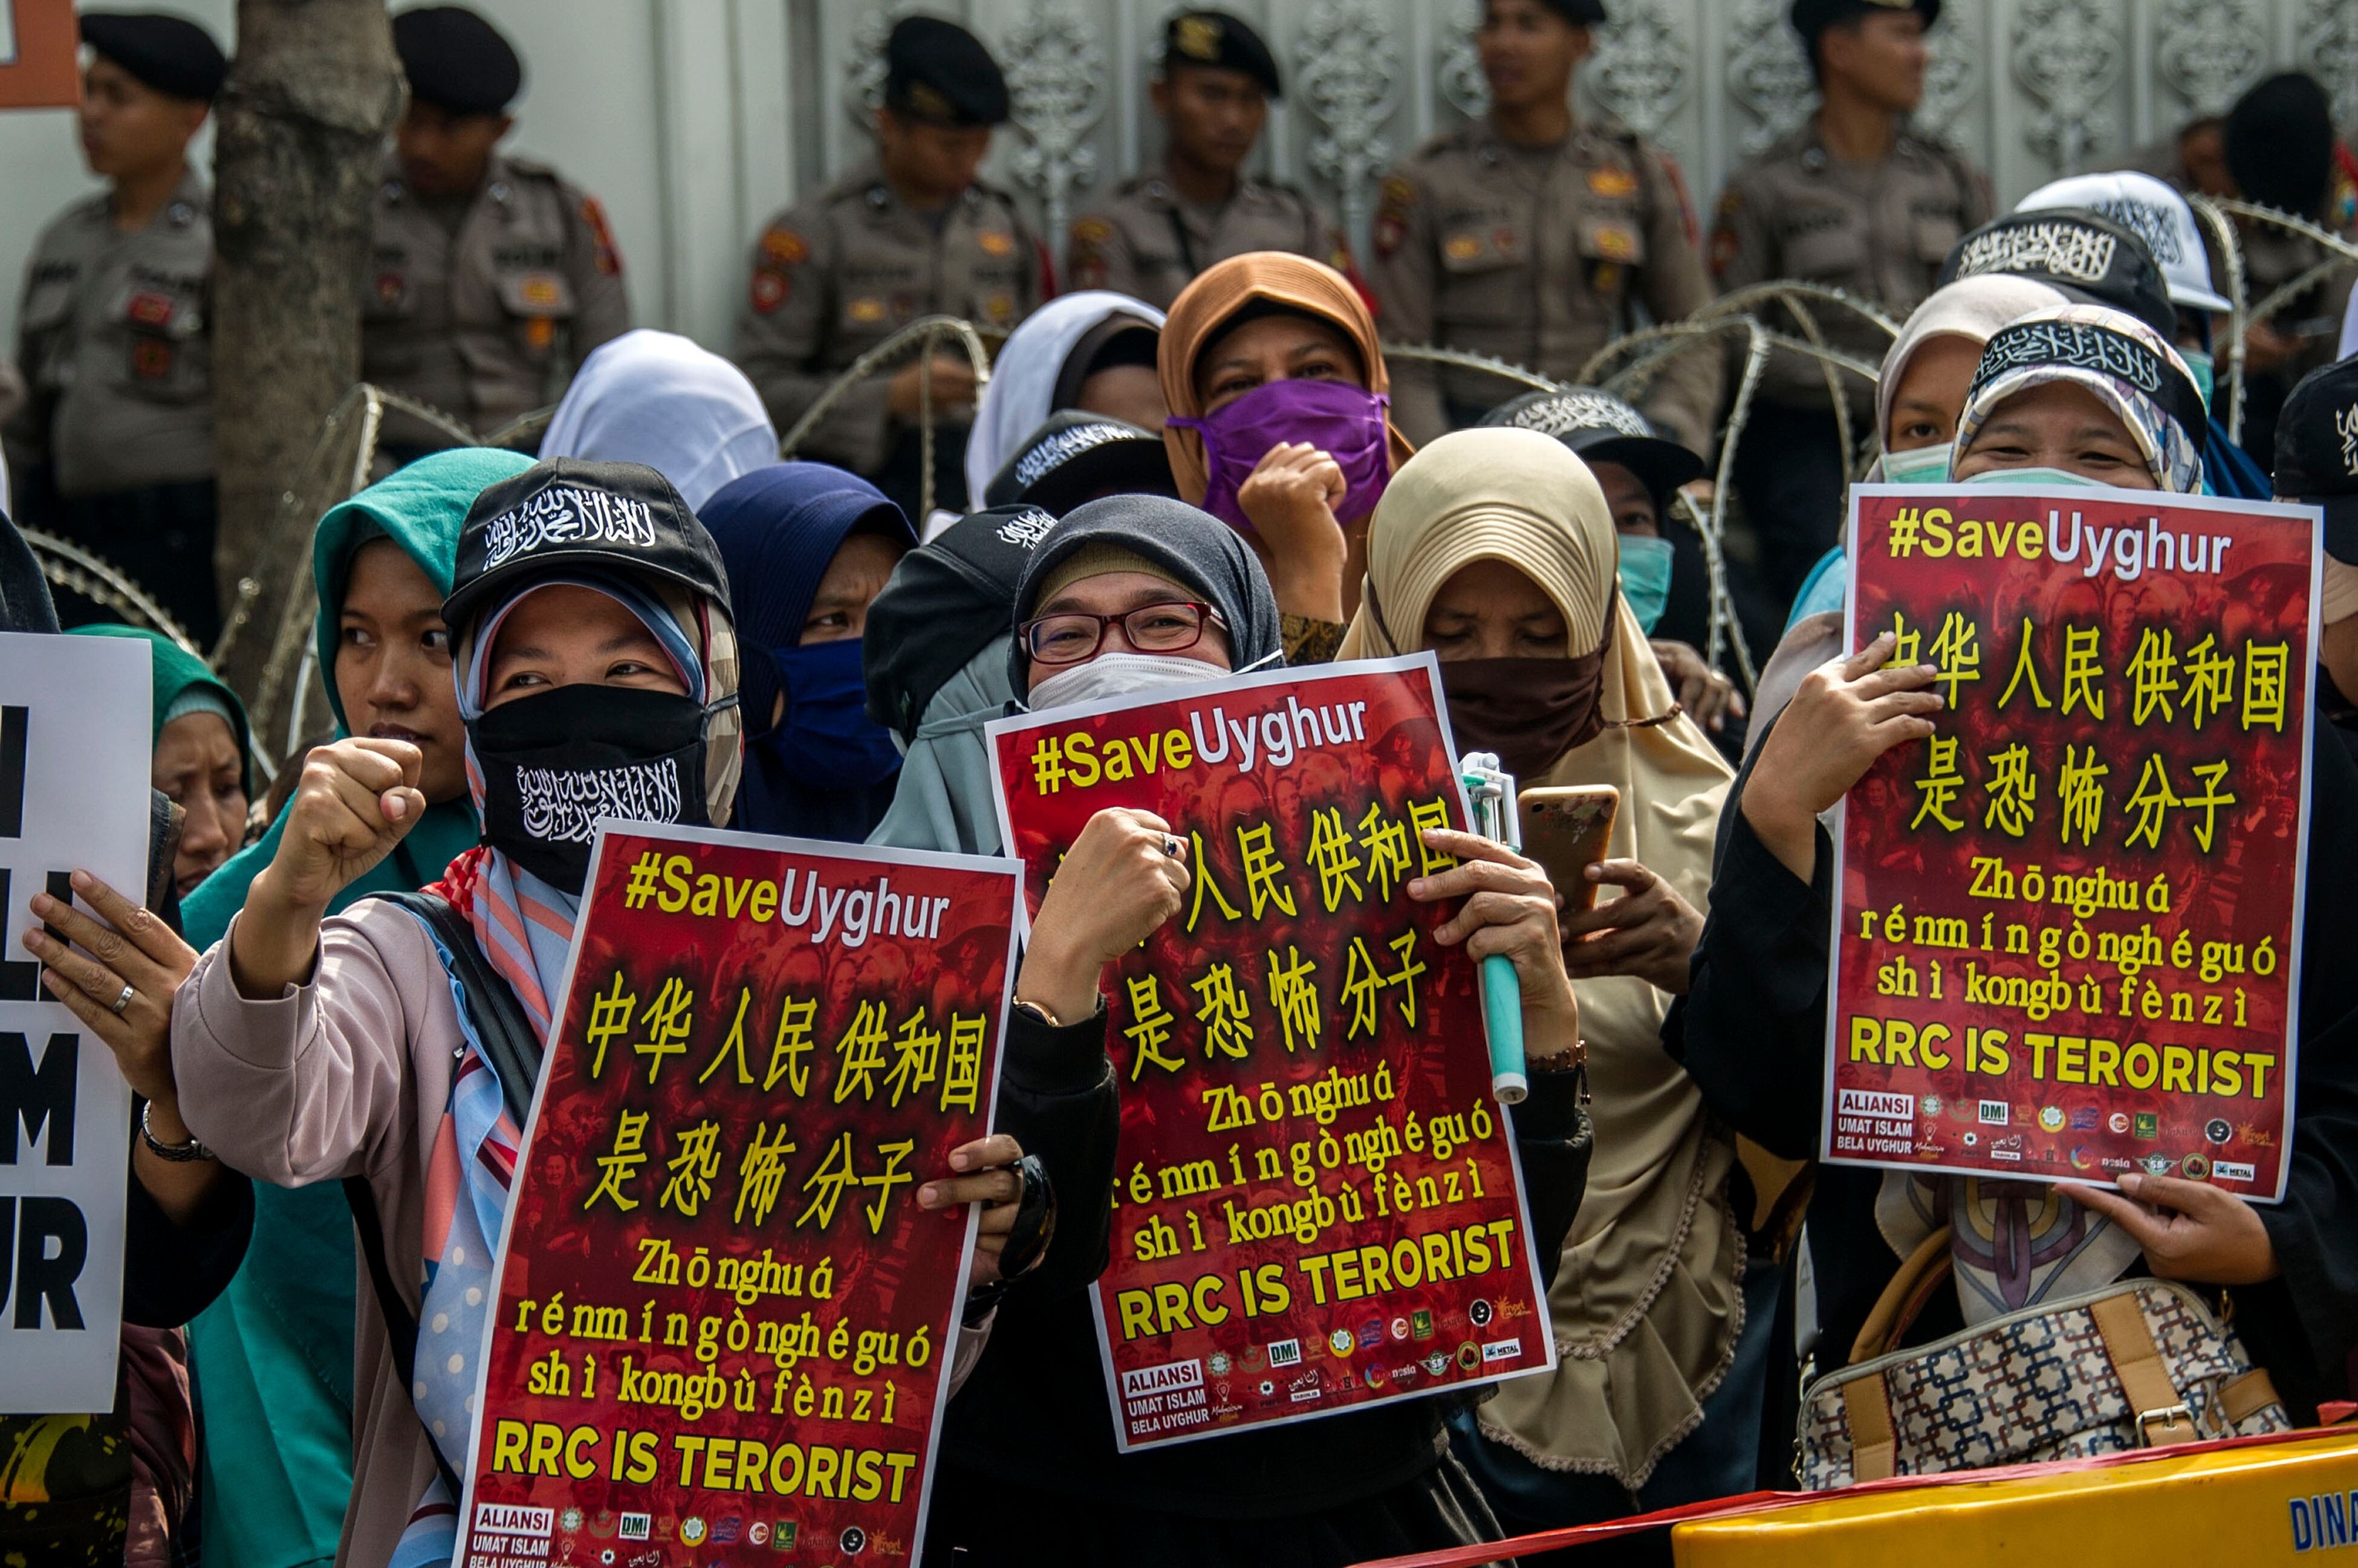 Indonesian Muslim hardliners protest against Chinese treatment of Uygurs in front of the Chinese consulate in Surabaya, East Java, last December. Photo: AFP